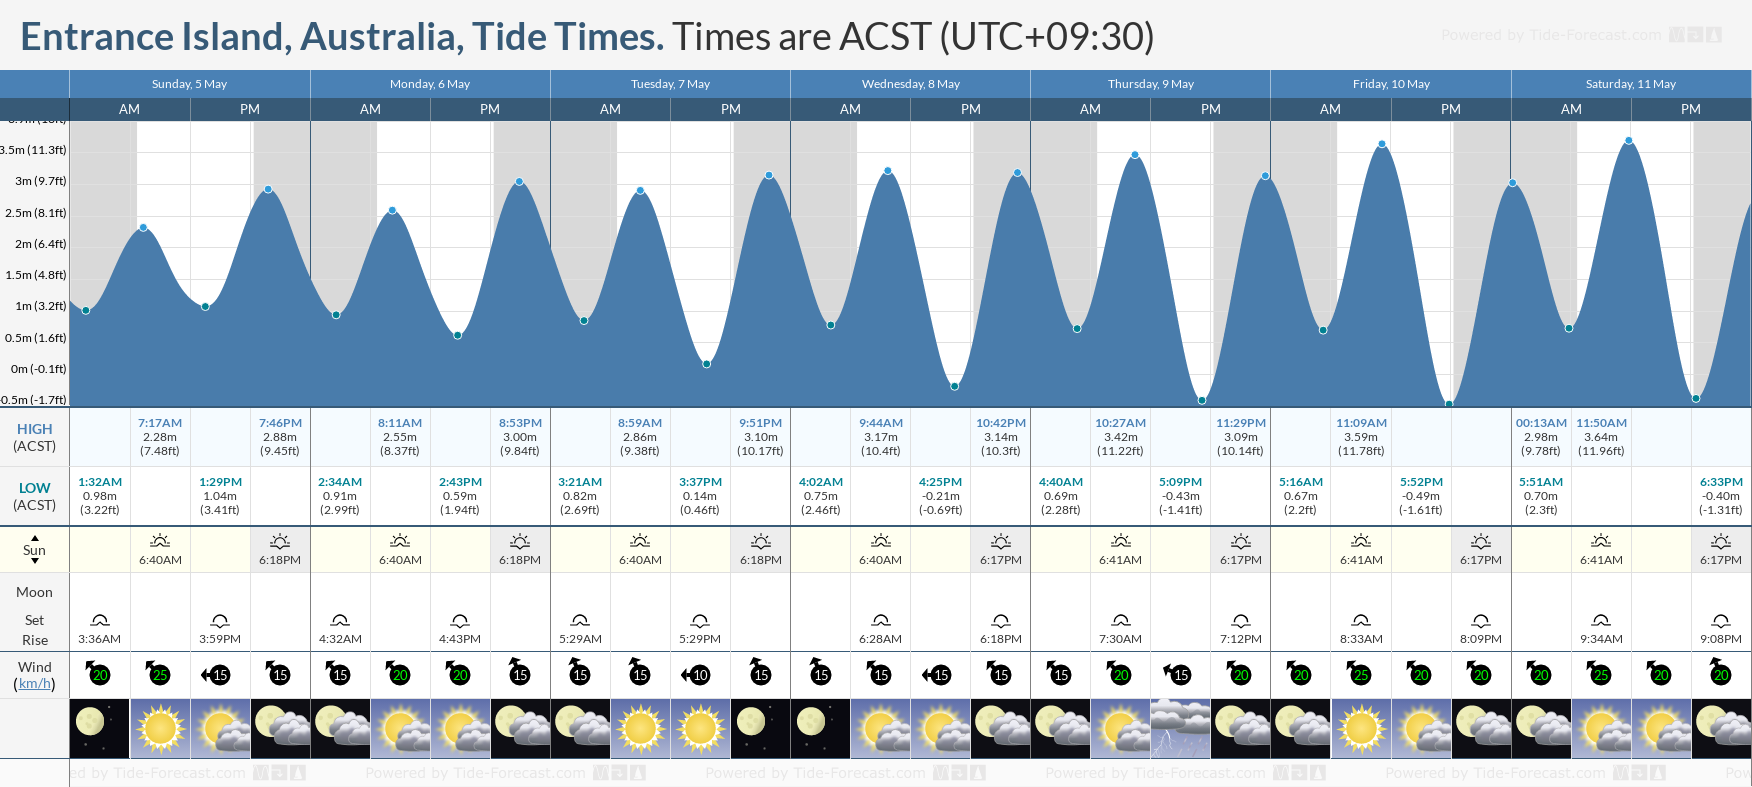 Entrance Island, Australia Tide Chart including high and low tide tide times for the next 7 days